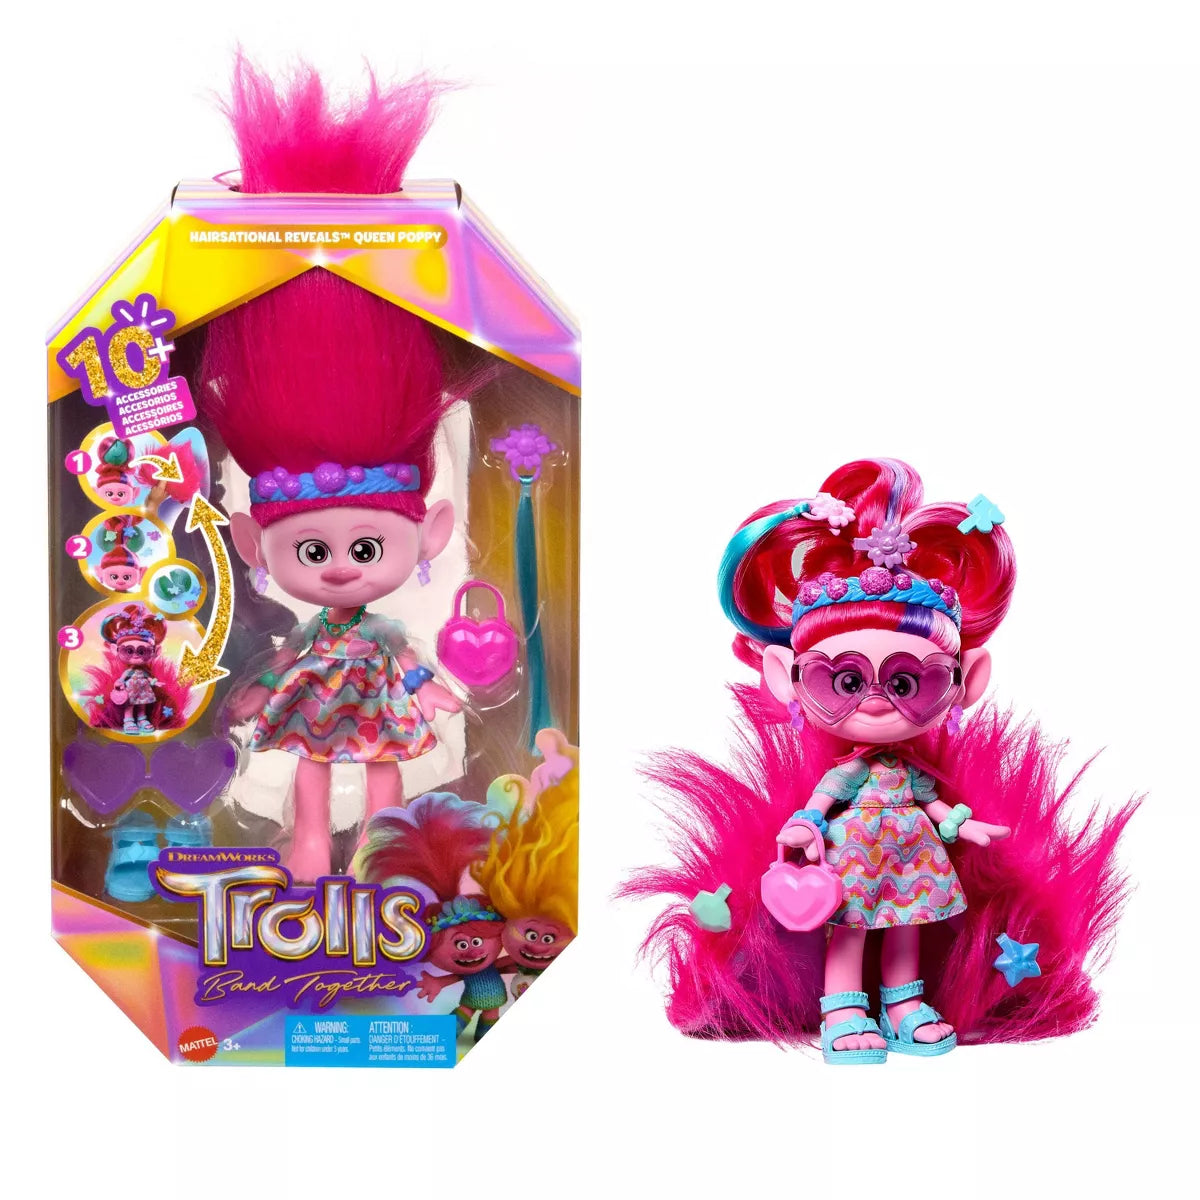 New Trolls Queen Poppy Backpack with Detachable Lunch Box 2 Piece Set for  Kids | eBay